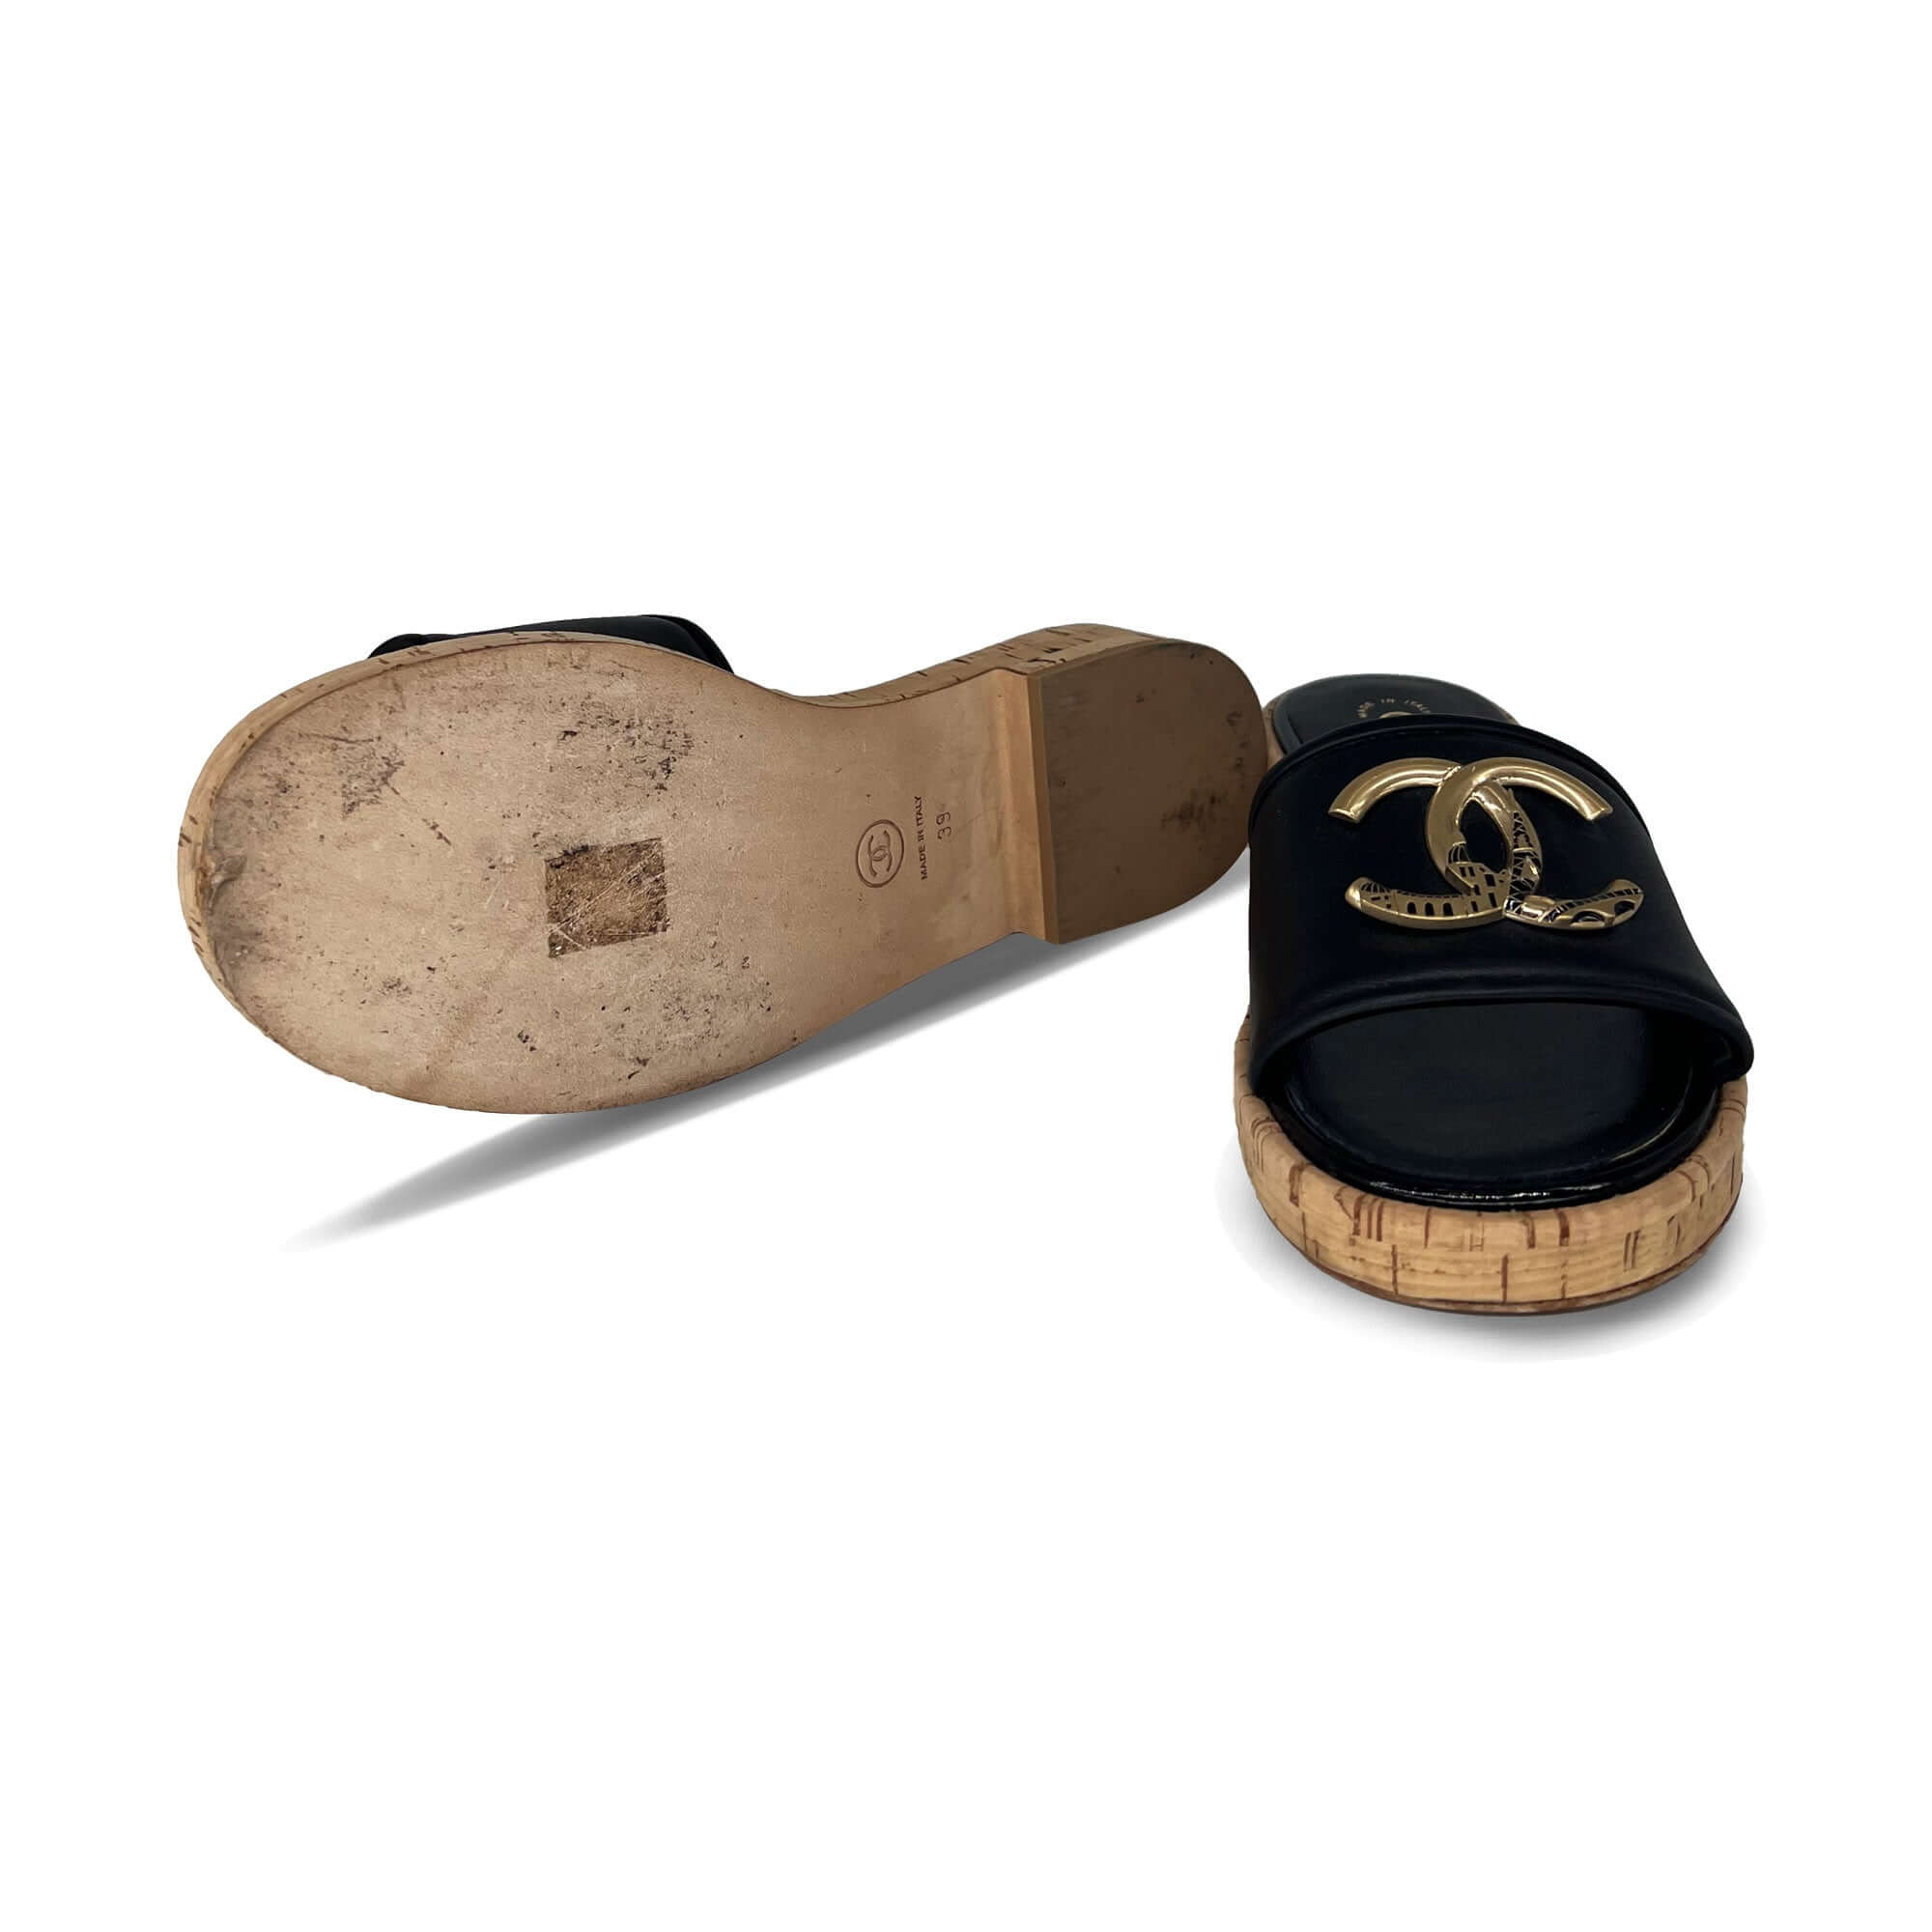 Chanel gold logo mules sandals